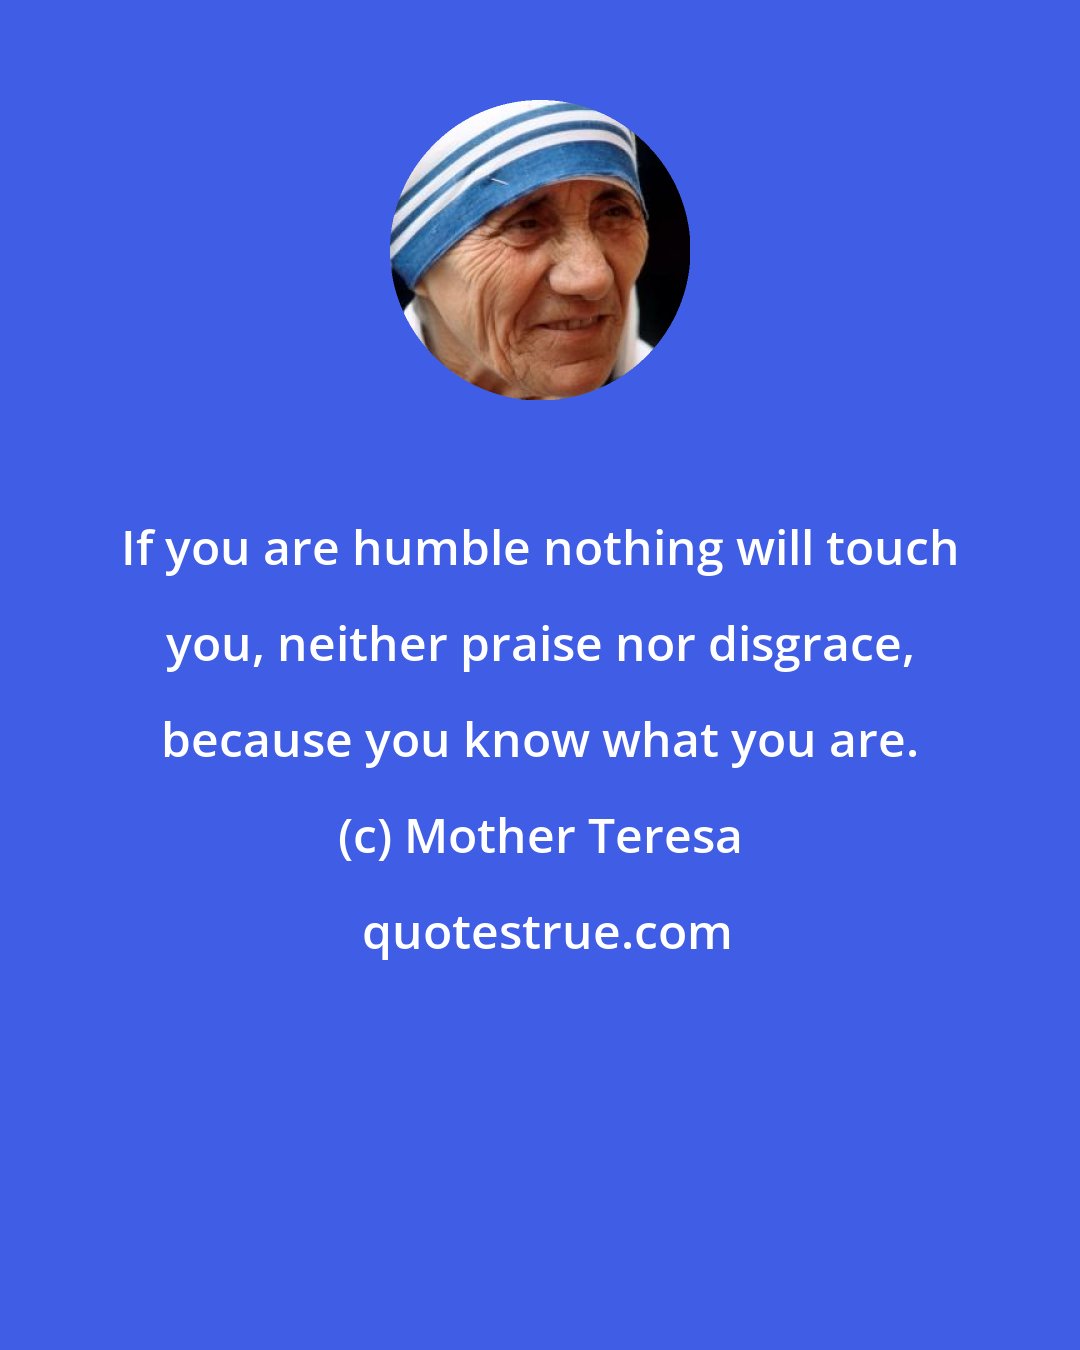 Mother Teresa: If you are humble nothing will touch you, neither praise nor disgrace, because you know what you are.